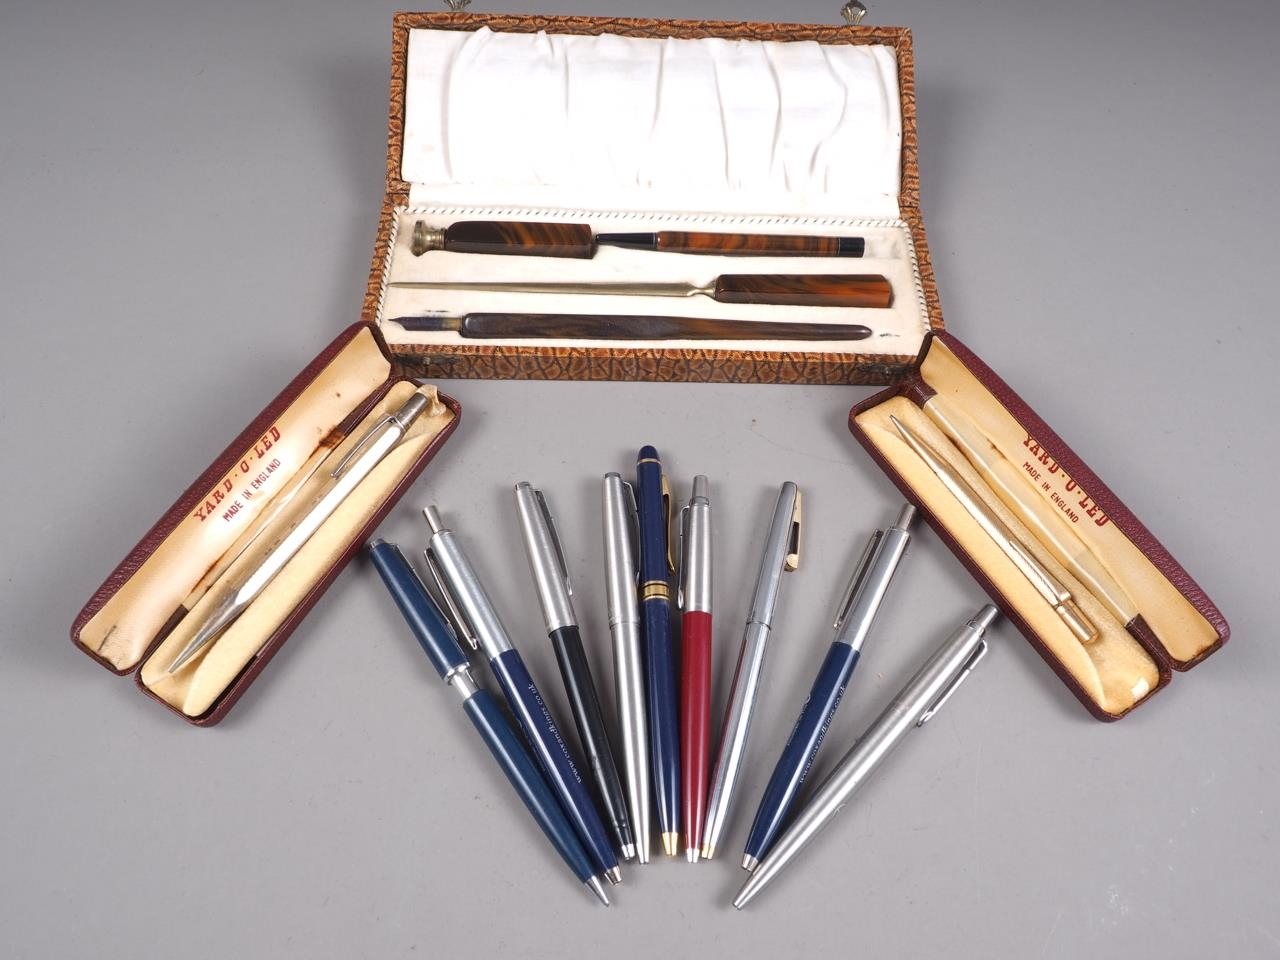 A Yard-O-Led propelling pencil, a rolled gold Yard-O-Lette propelling pencil, a desk set, and a